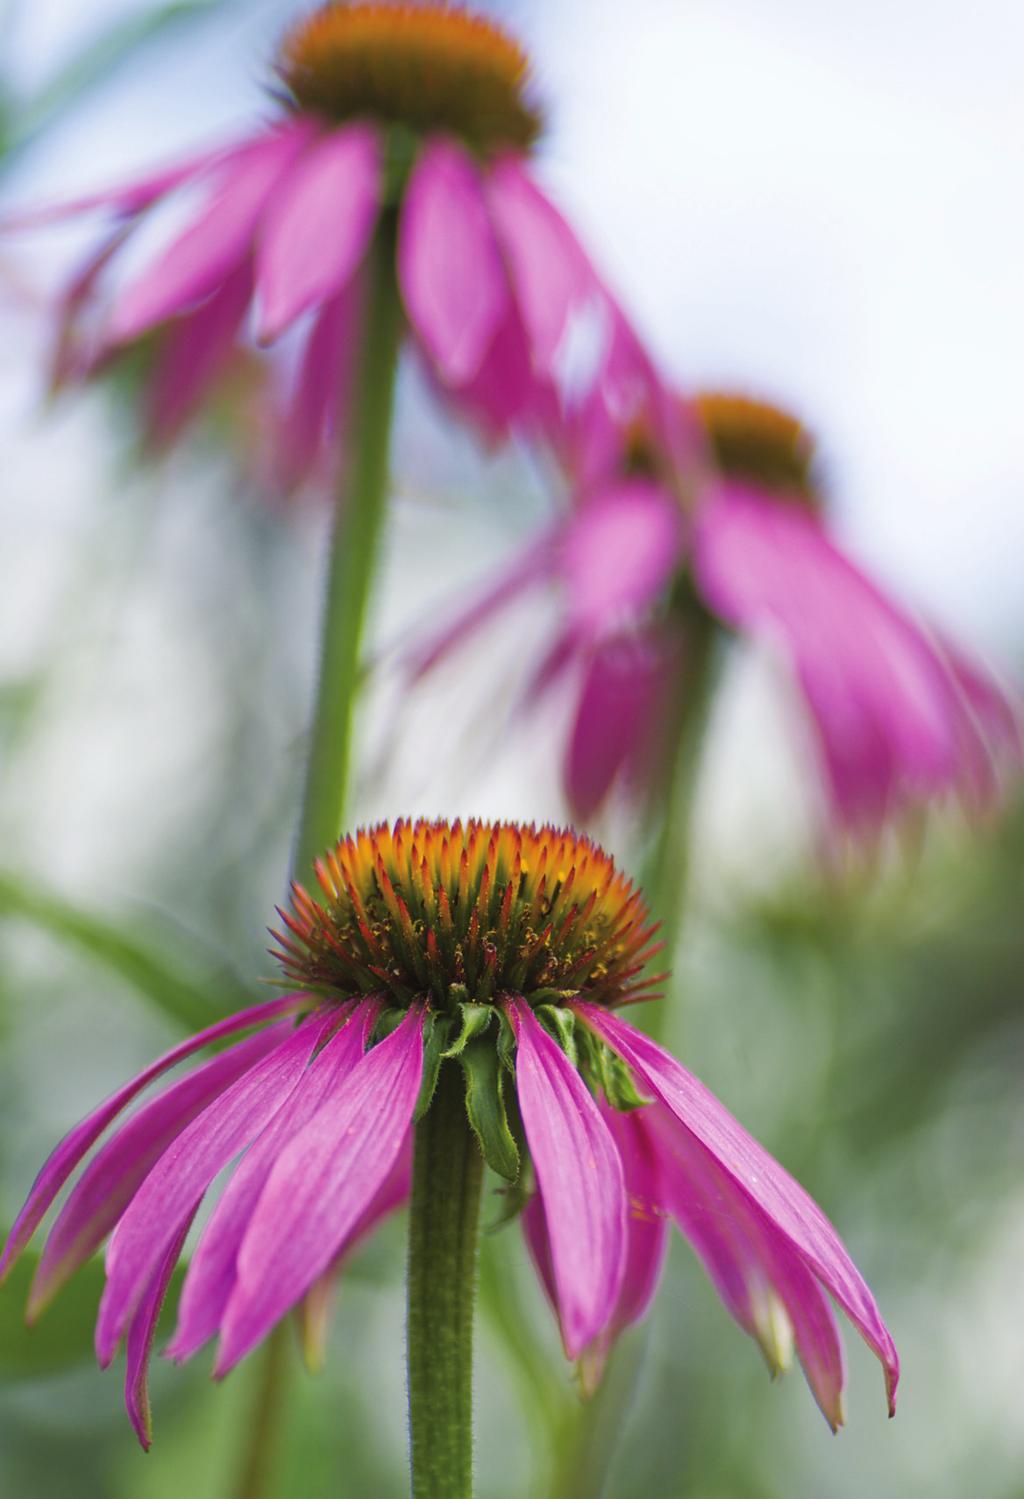 Echinacea that the consumption of spicy foods, including those seasoned with these tasty and potent herbs, can ward off digestive infections.